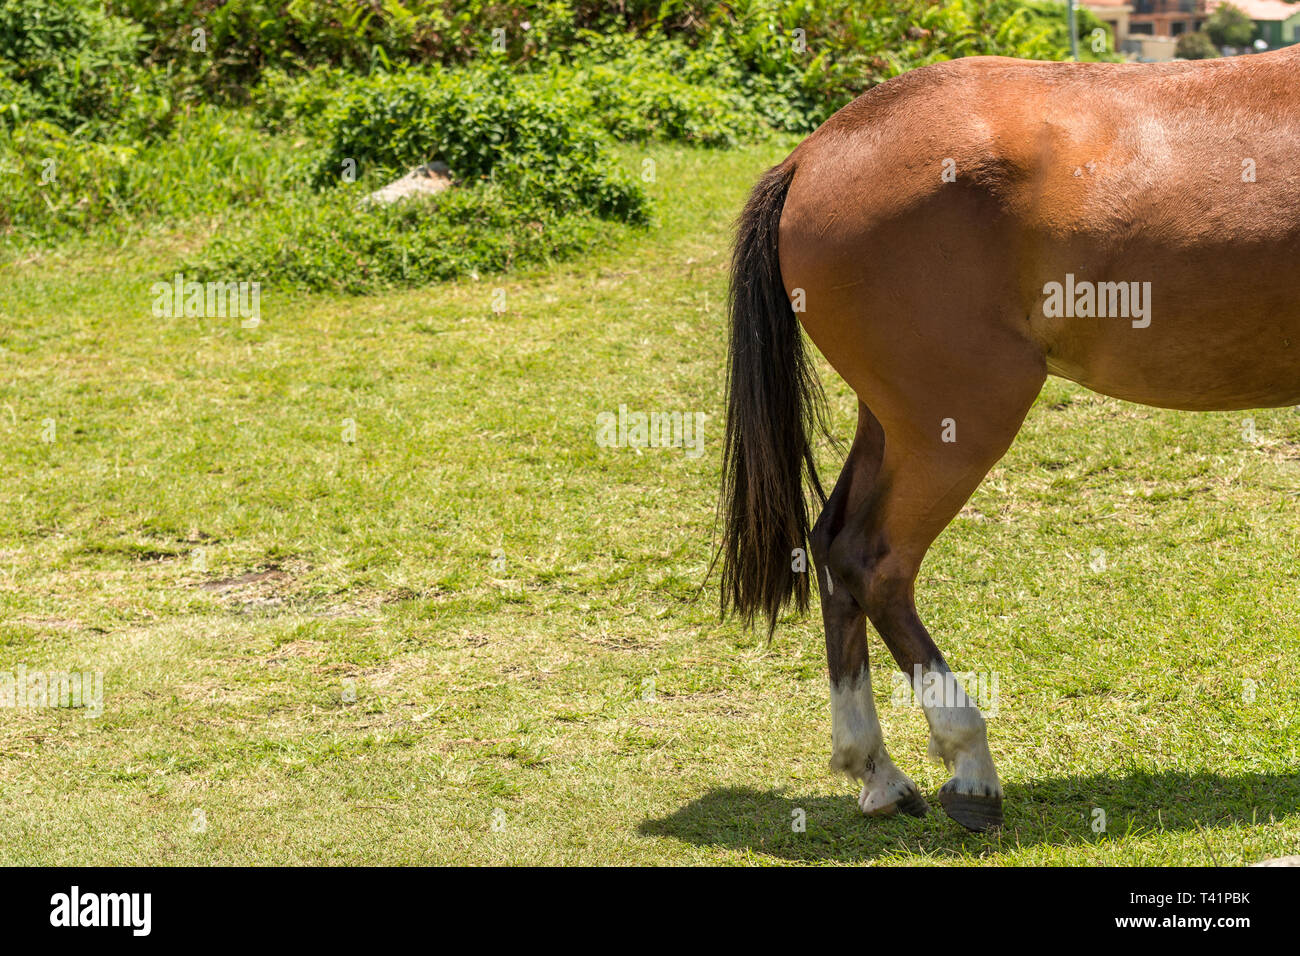 2019, January. Florianopolis, Brazil. The back of a brown horse on the grass, in Armacao Beach. Stock Photo